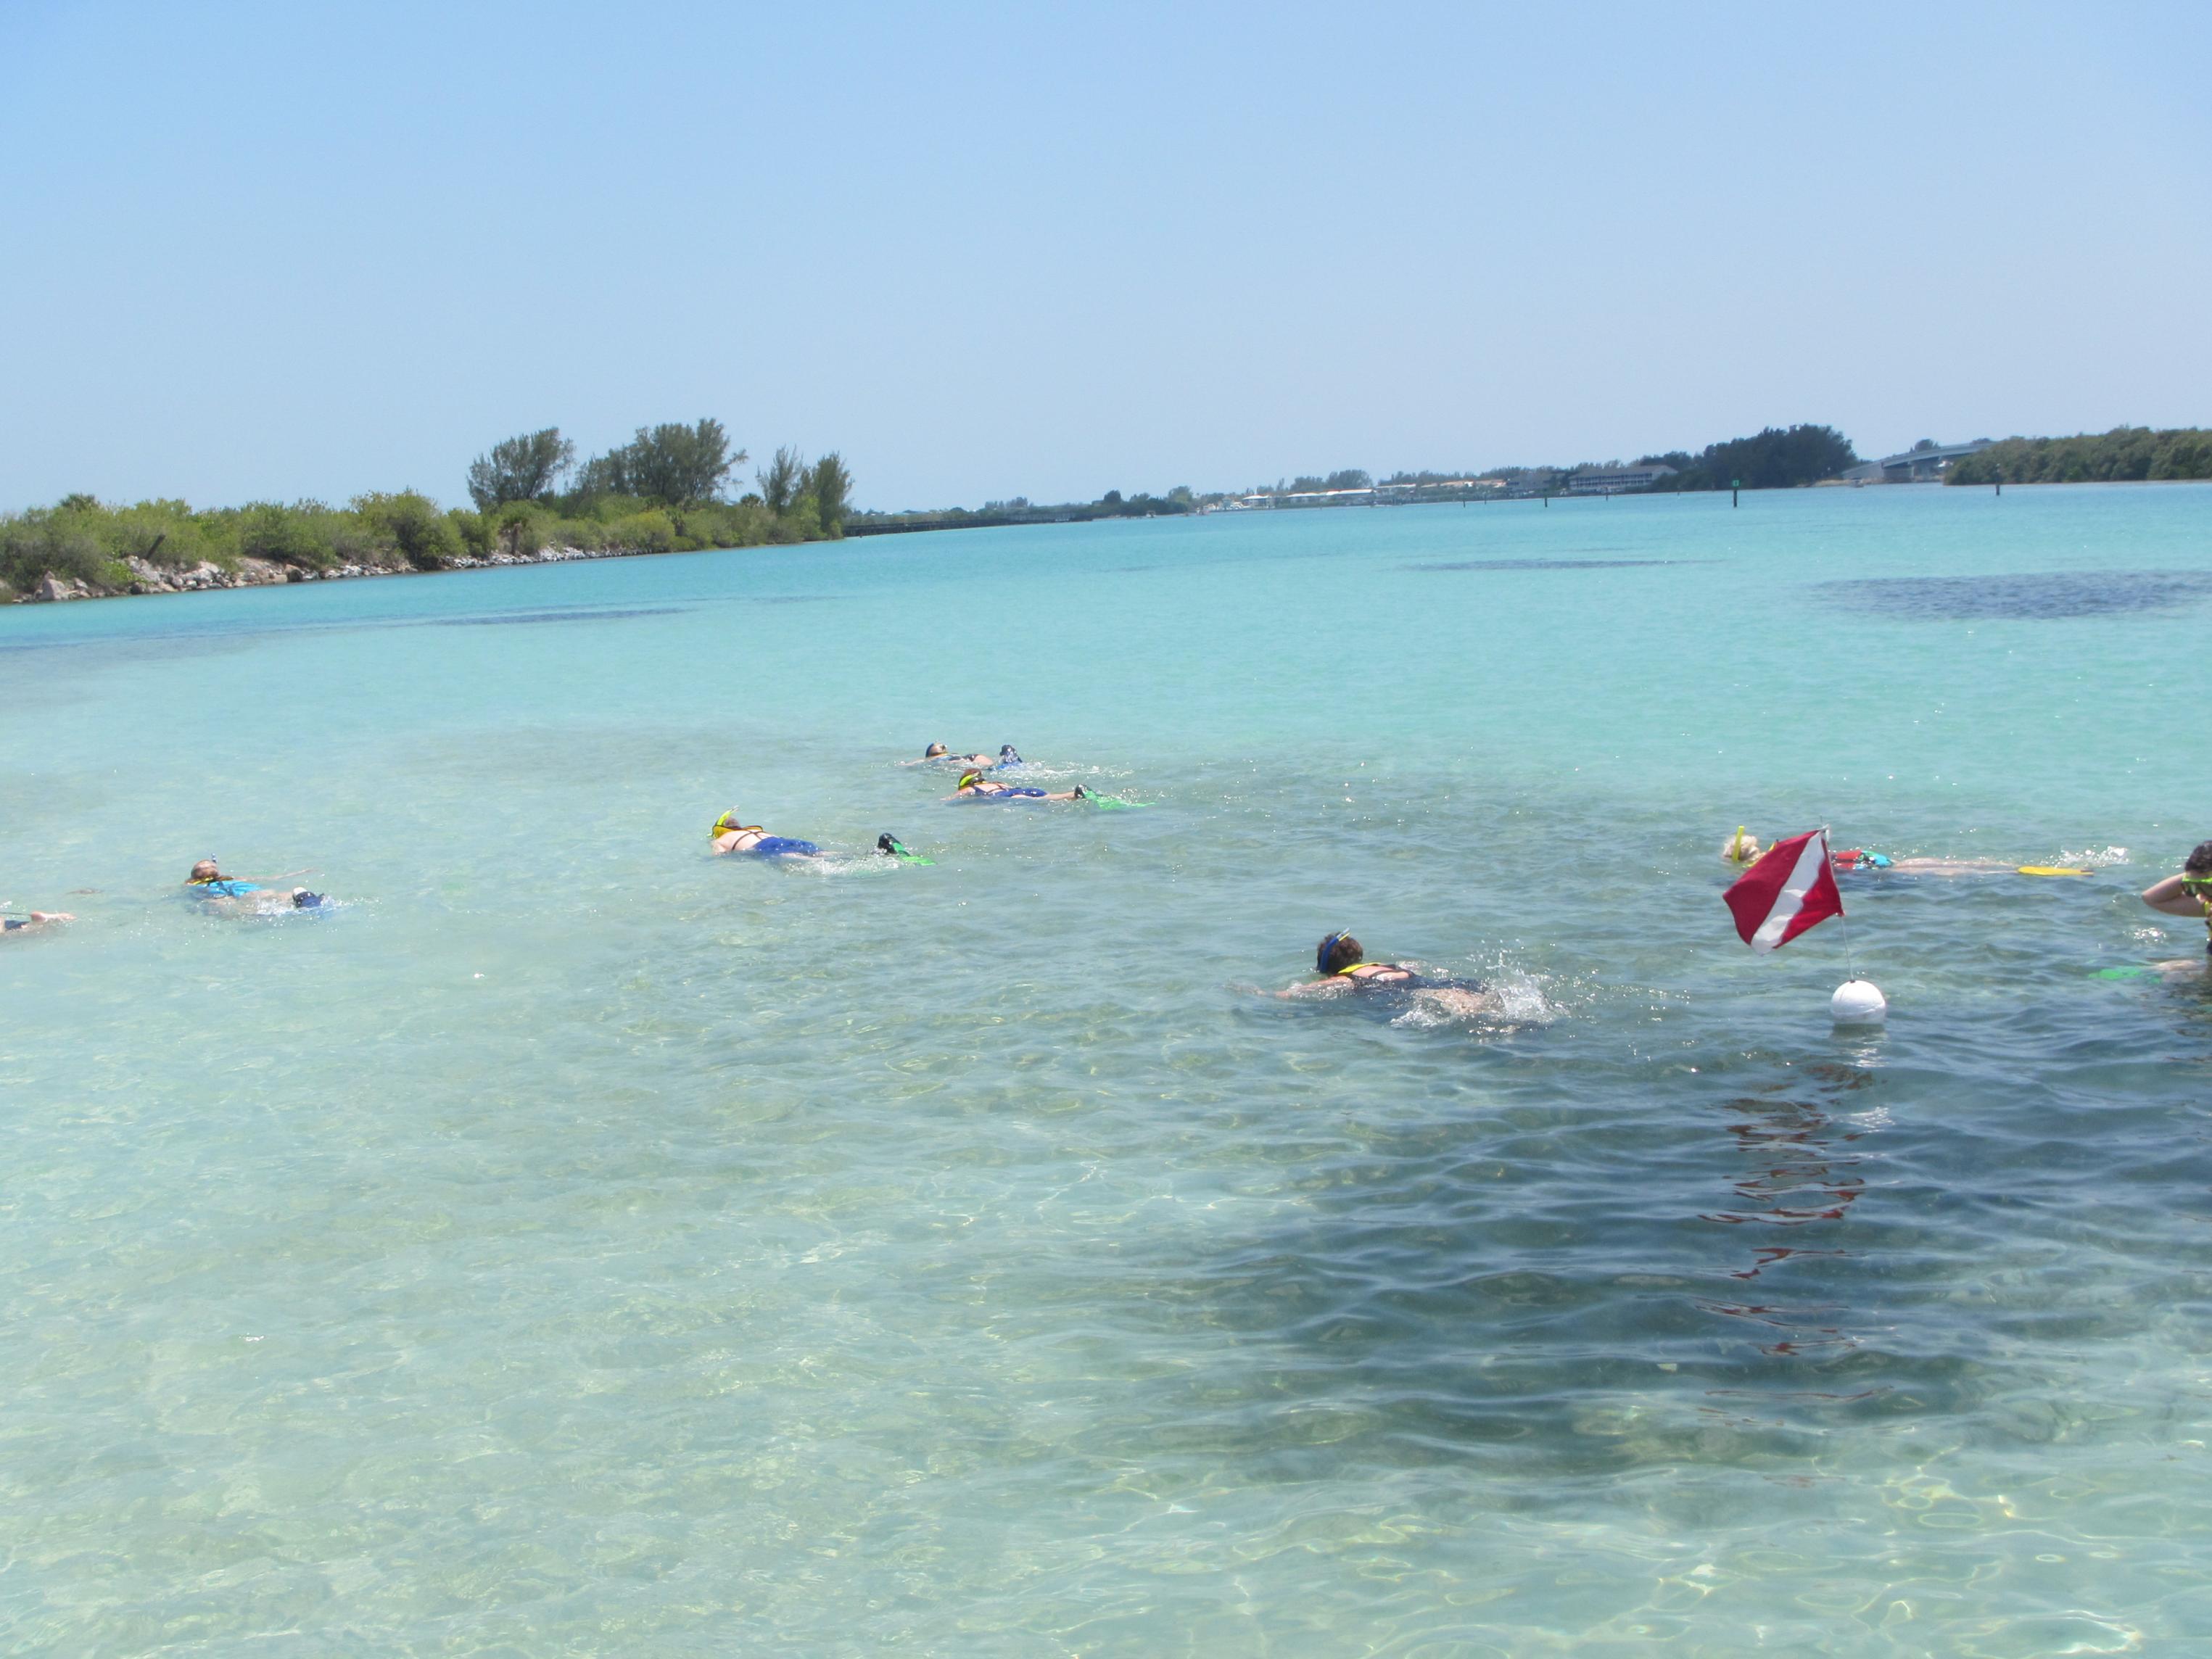 The turquoise waters near Gasparilla Pass are a great place to snorkel in Gasparilla Sound-Charlotte Harbor Aquatic Preserve.